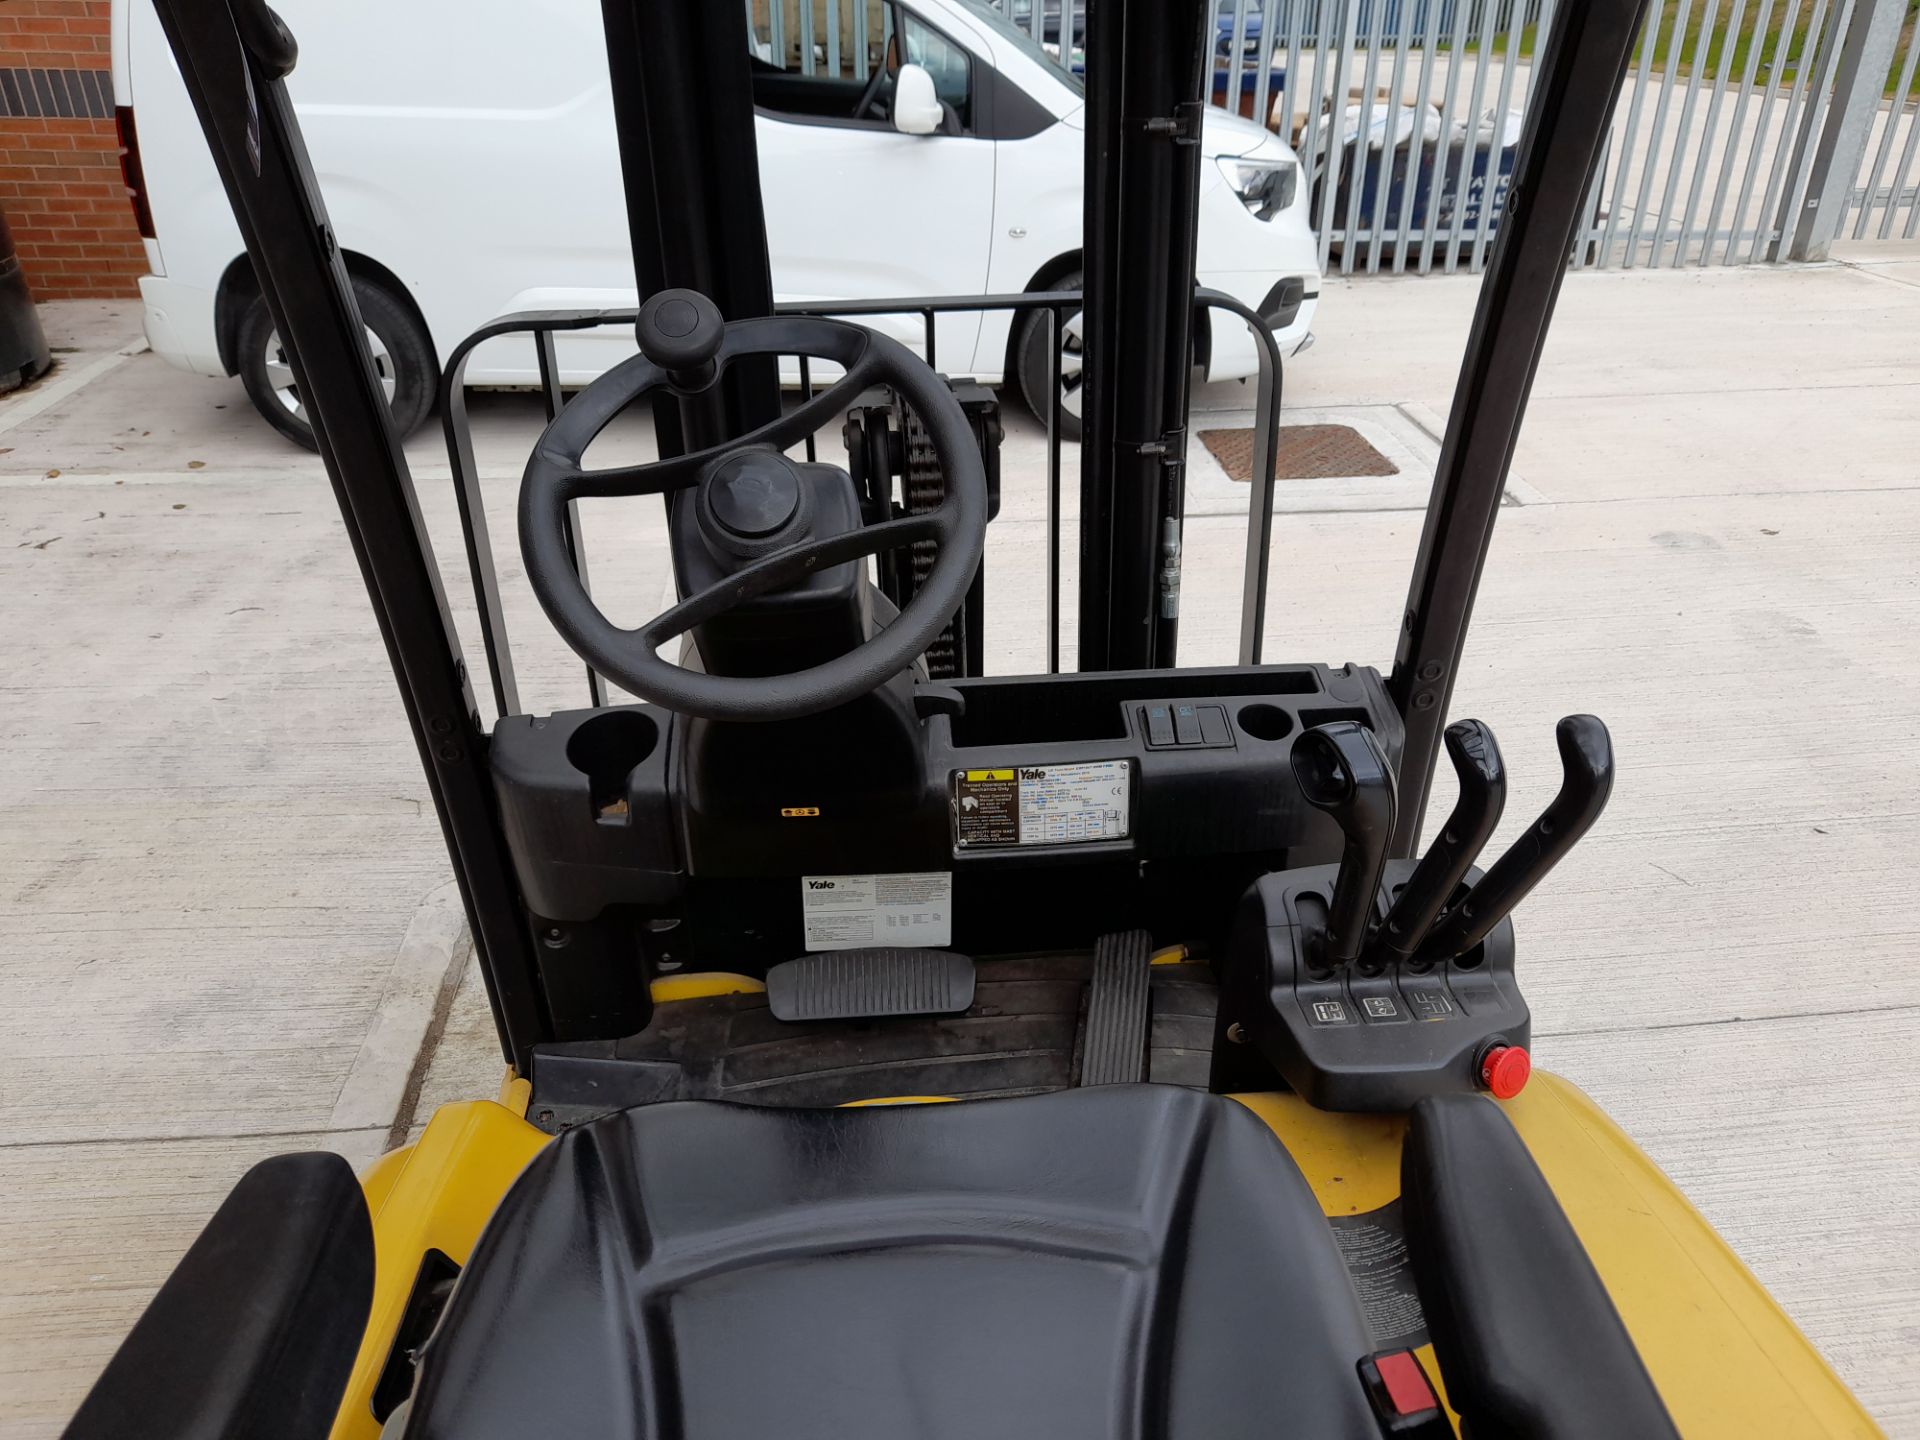 Yale ERP18VT MWBF2080 1.8tonne capacity Electric Forklift Truck, serial number G807B02410H (2010), - Image 6 of 17